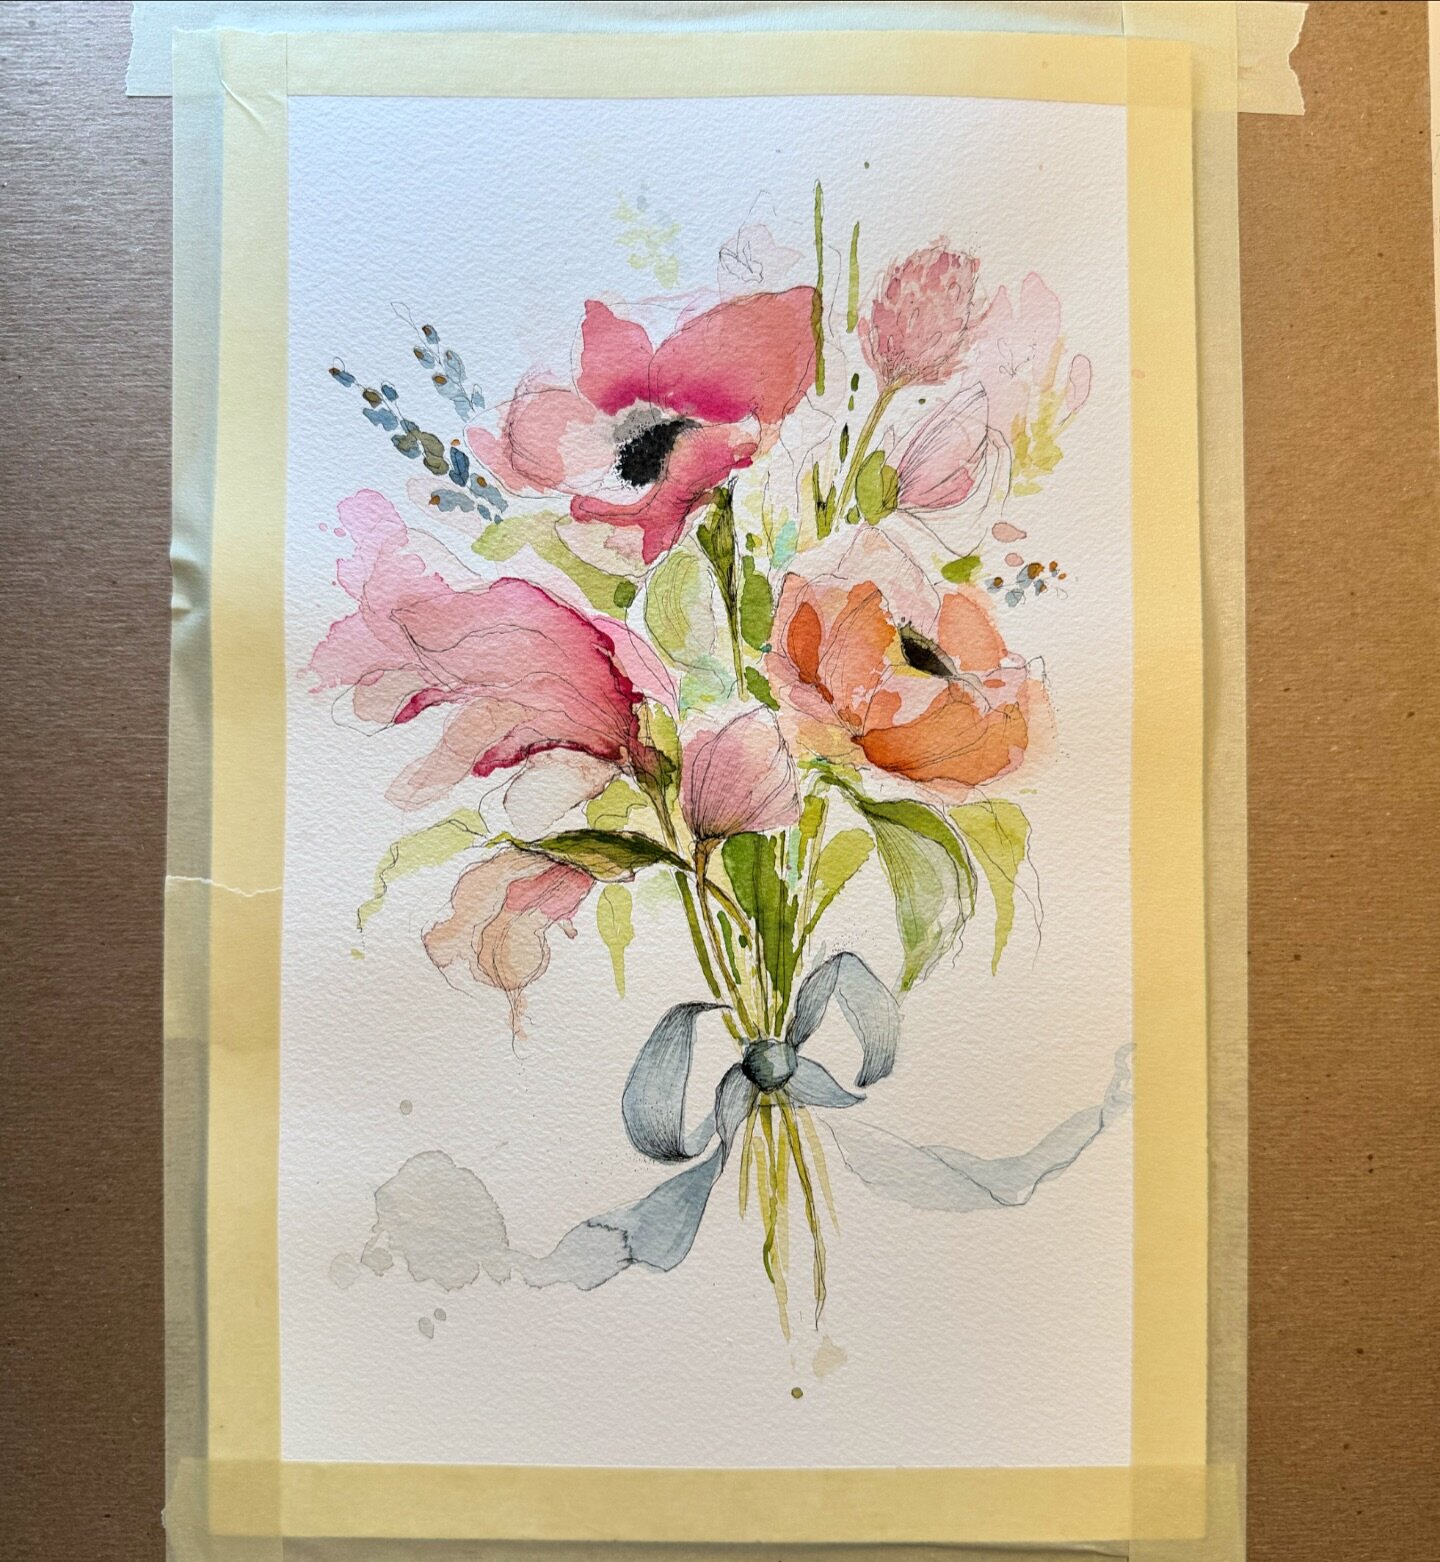 Not yet sure if I want to add a background or leave it alone. Thoughts?
.
.
#workinprogress #watercolor #bouquet #weddingflowers #abstract #botanicalart 
#illustration